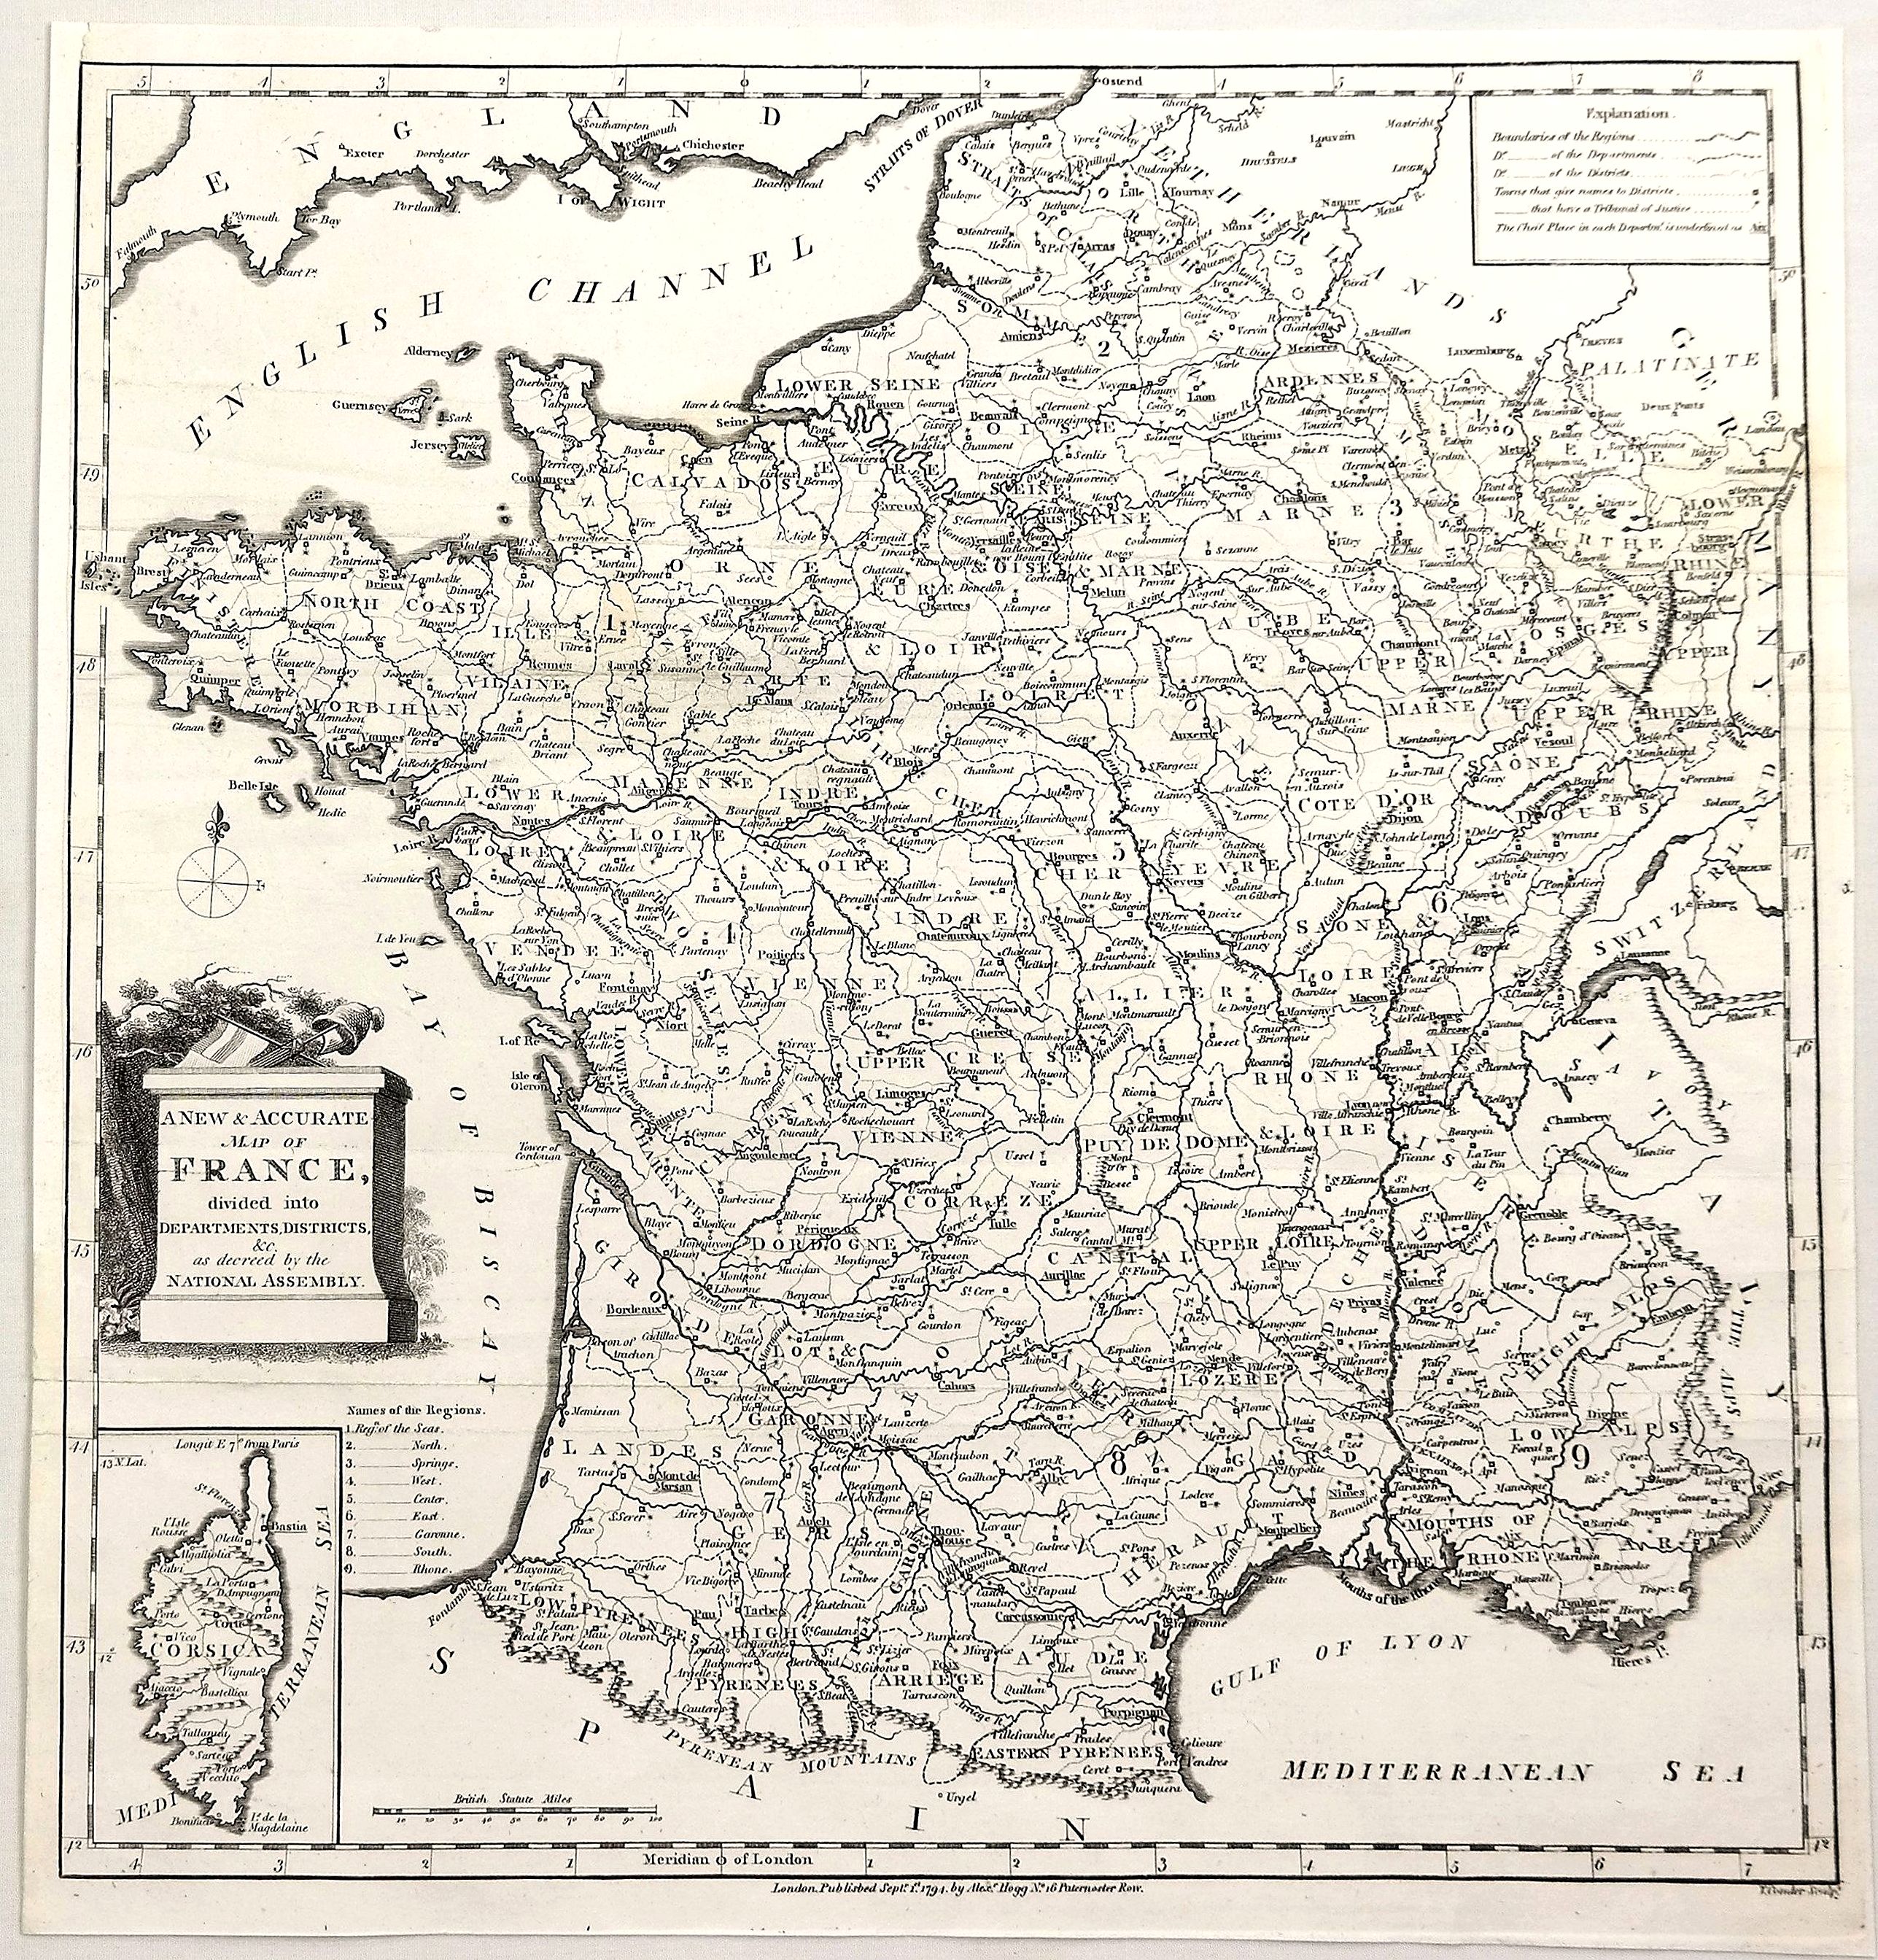 A New & Accurate Map of France, Divided Into Departments, Districts &c. as Decreed by the National Assembly